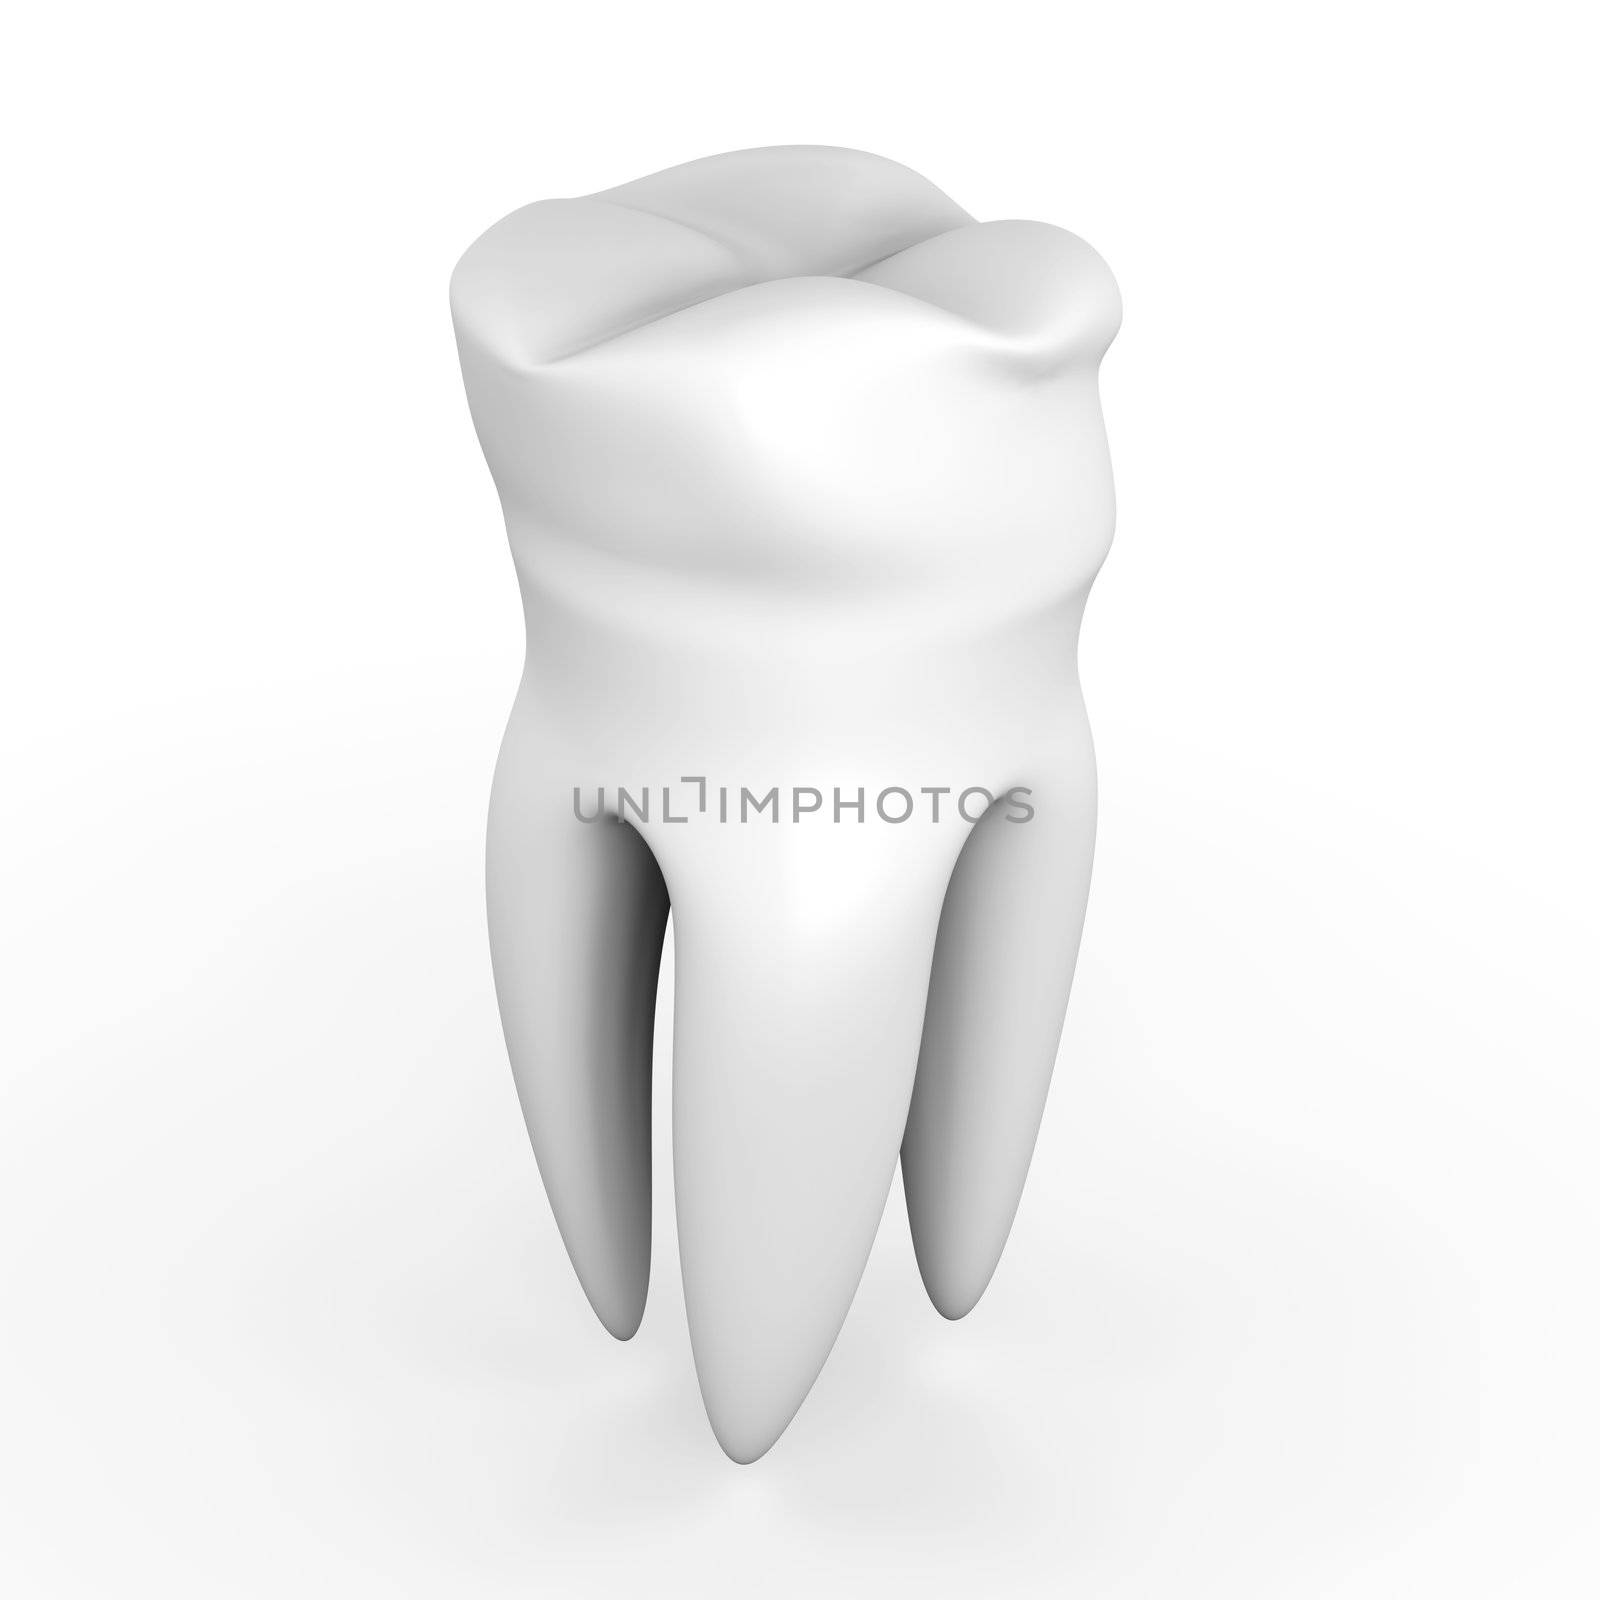 3D rendered illustration. Isolated on white.